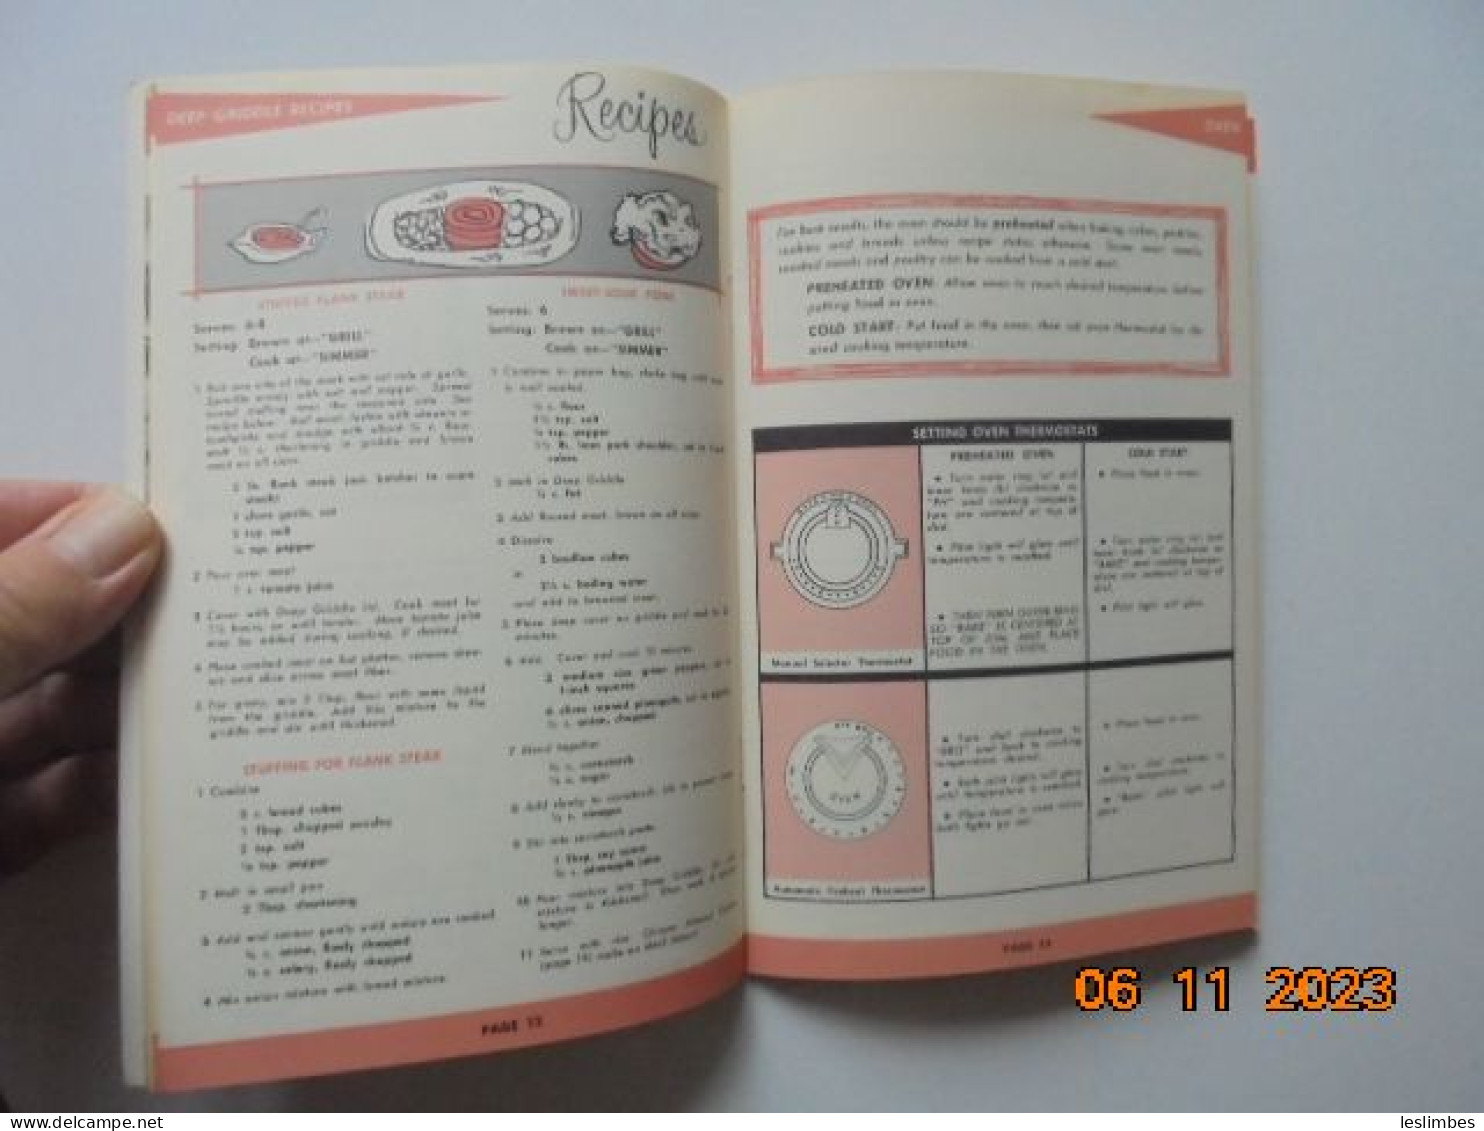 Electric Cooking With Your Kenmore: Recipes And Instructions - Sears, Roebuck And Company 1956 - Americana